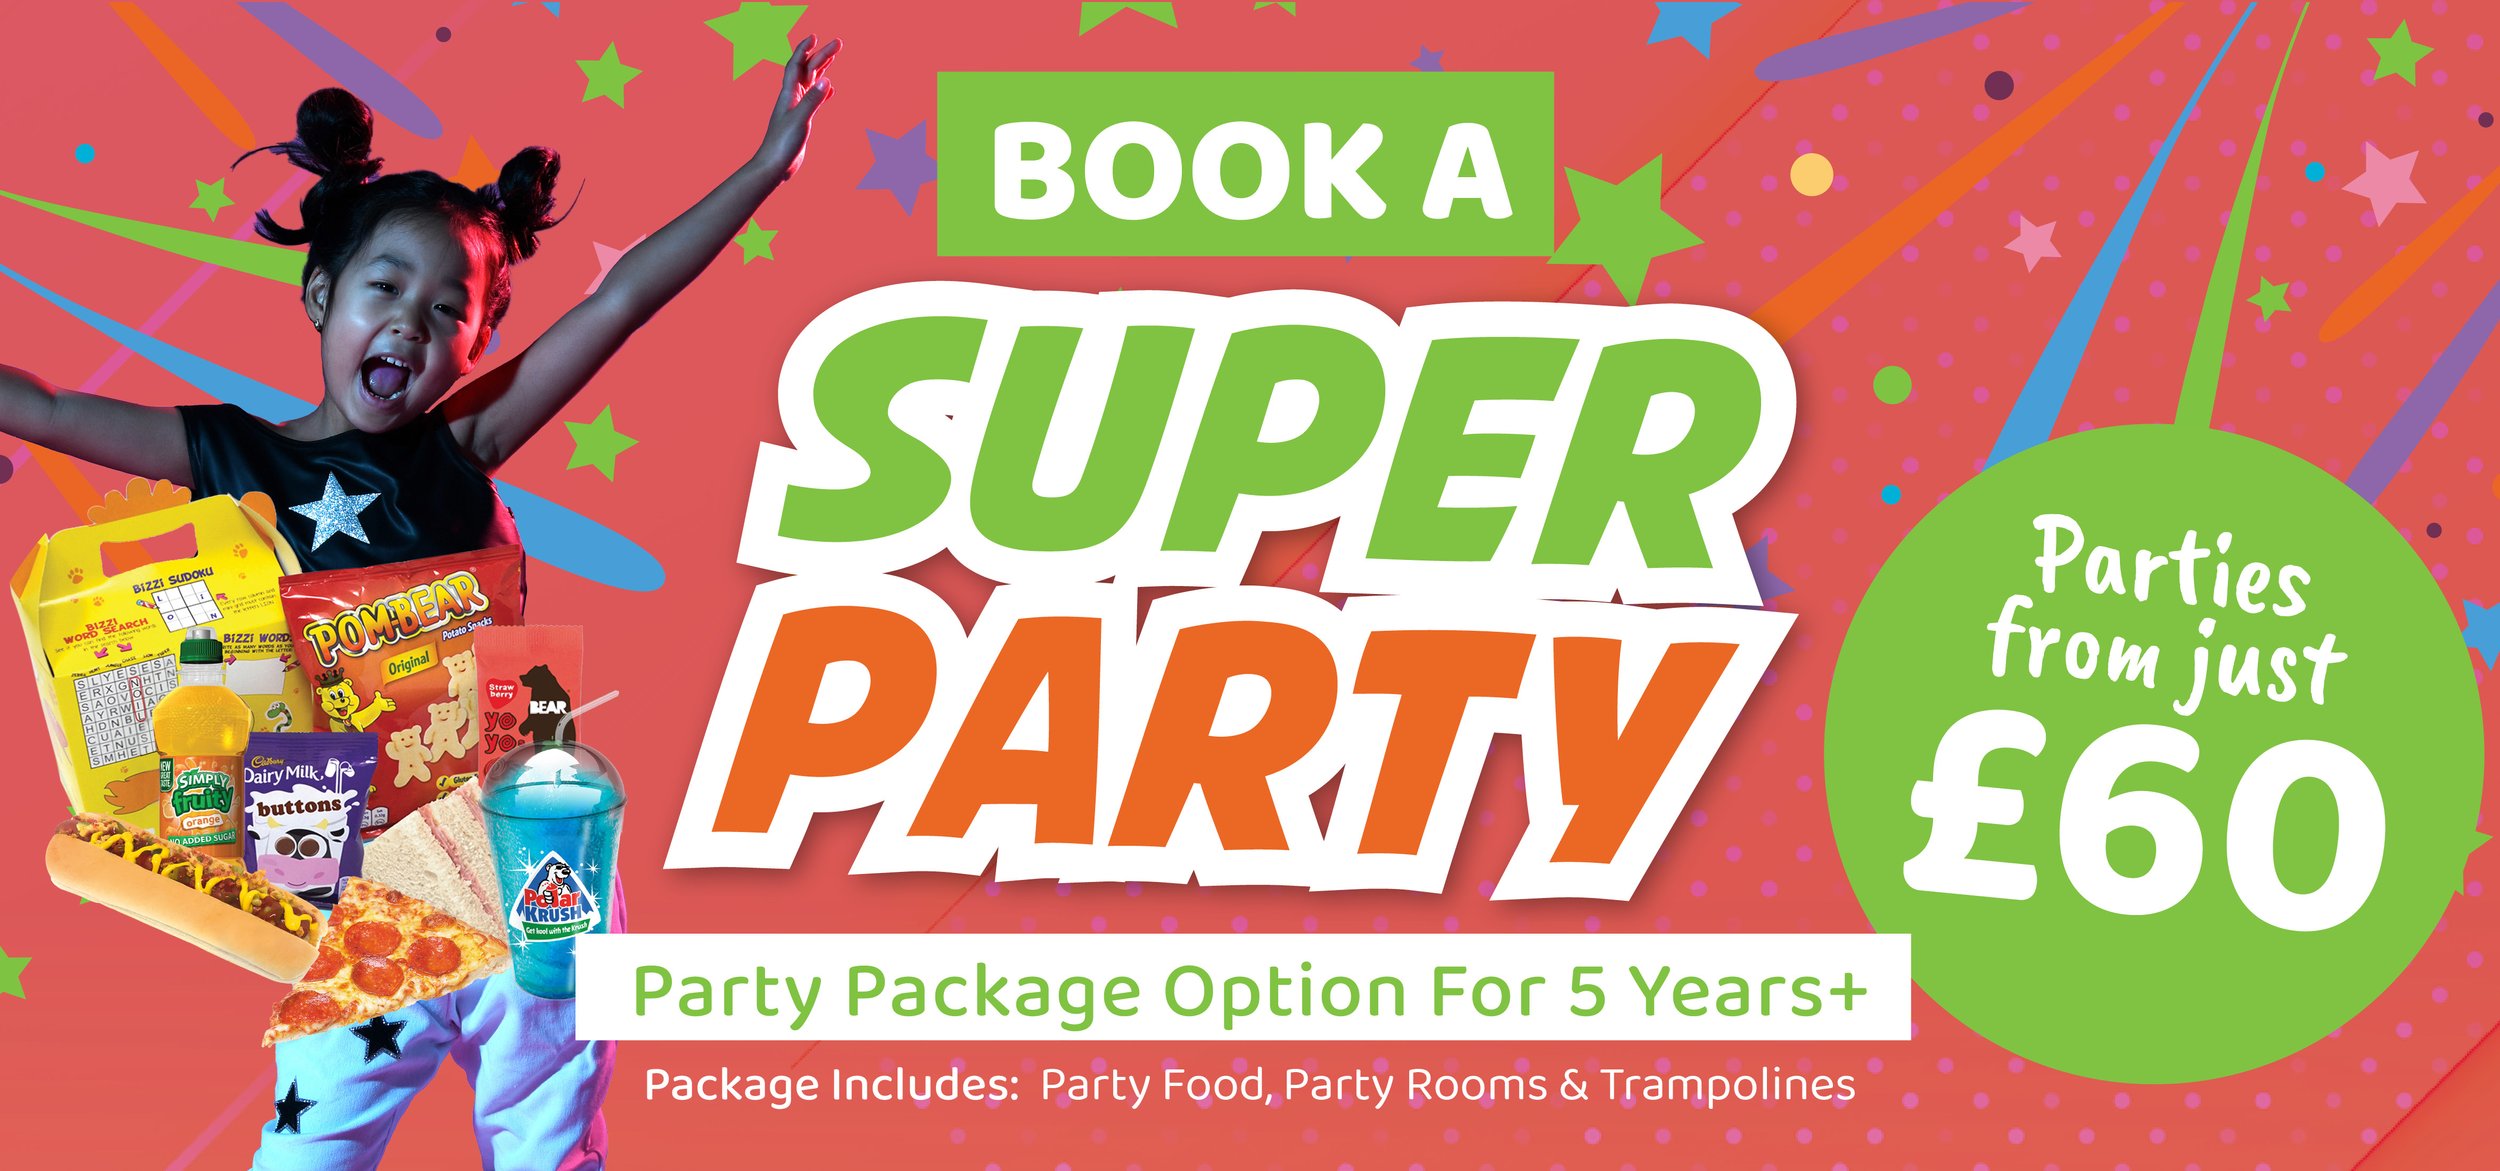 Book A Super Party - Website Banners.jpg